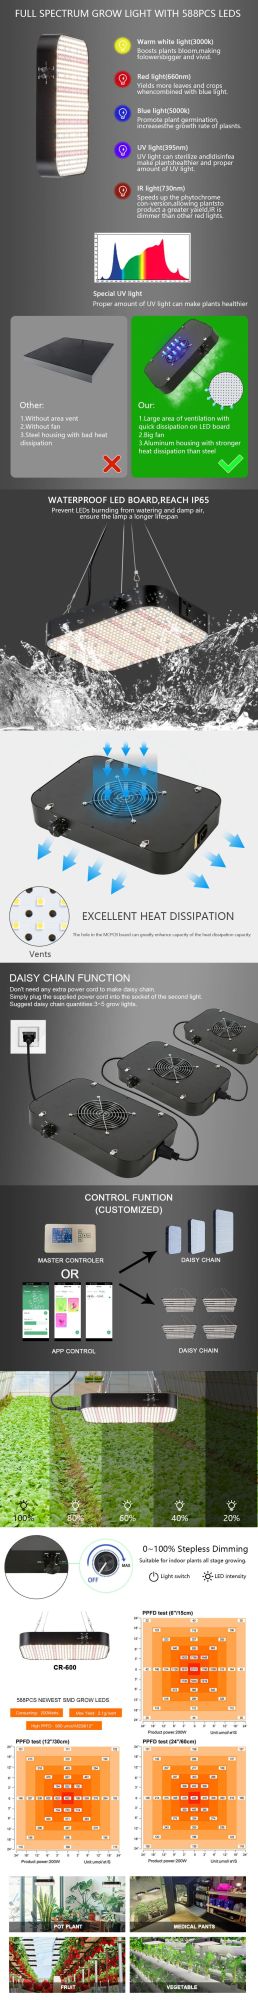 FCC CE RoHS New Patent 60W 80W 130W 200W Full Spectrum 0-100% Dimmable Daisy Chain Function High Ppf LED Grow Panel Plant Lights for Indoor Greenhouse Farmer